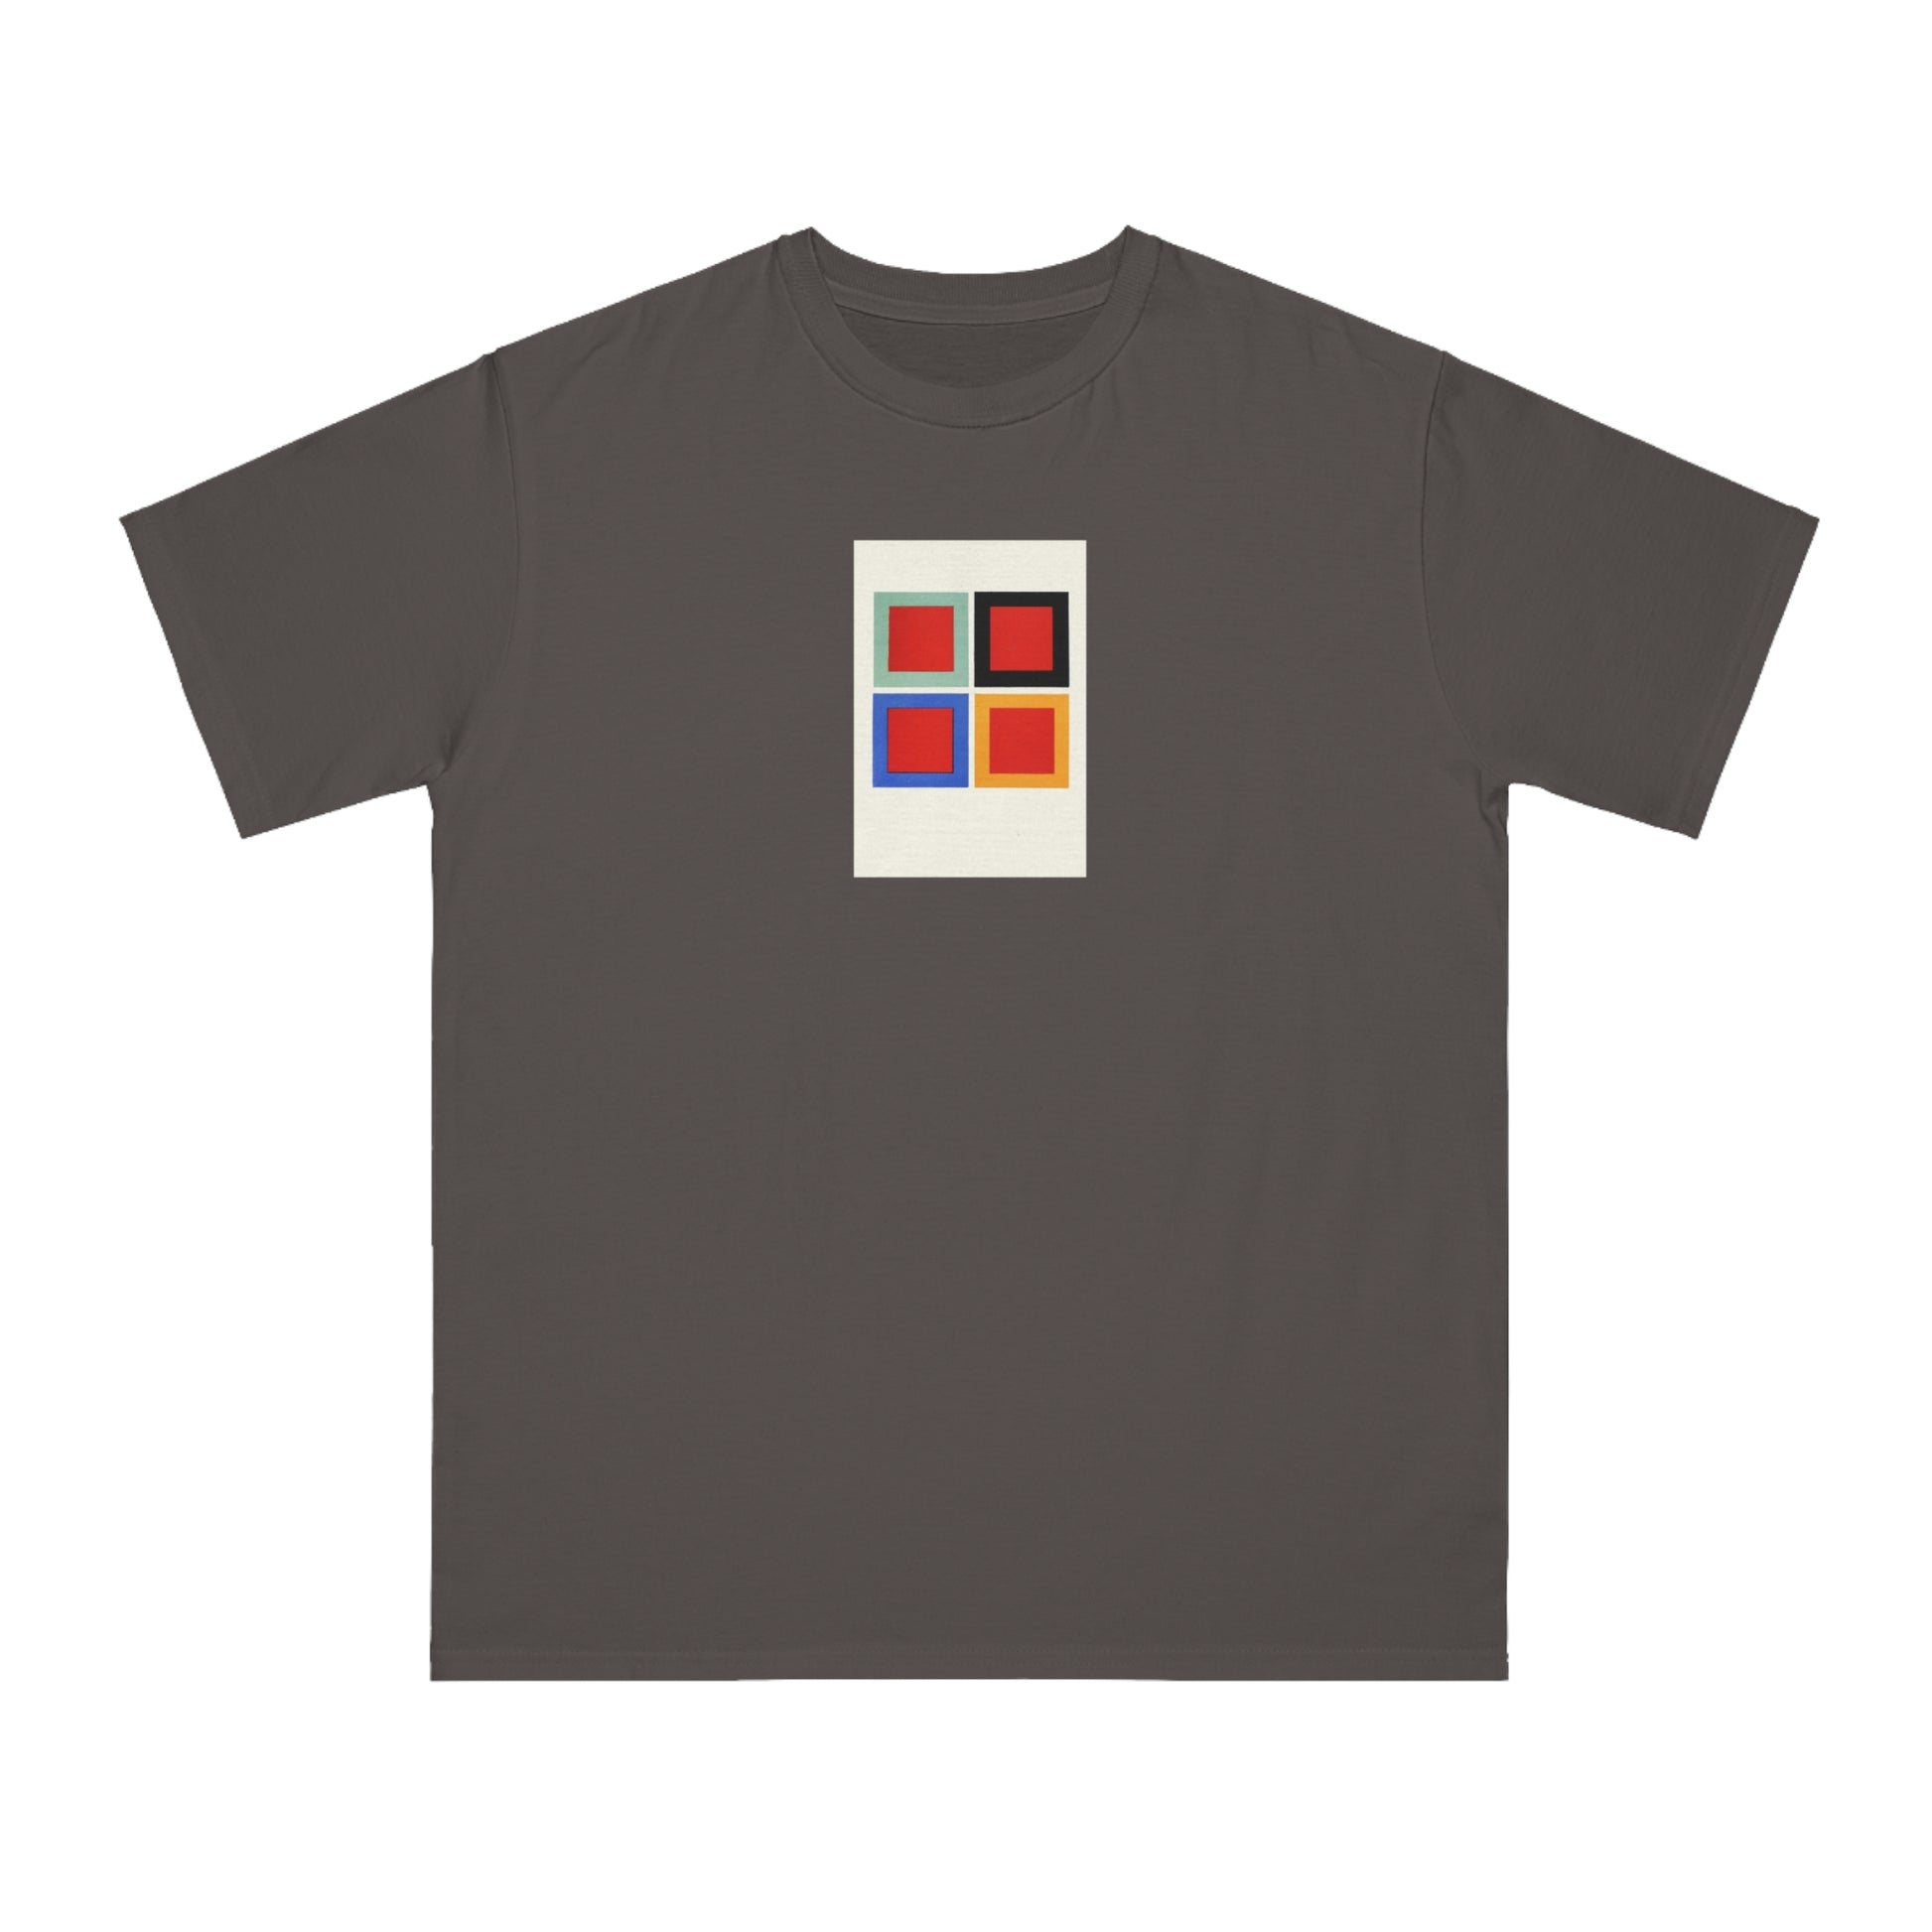 a gray t - shirt with a red, yellow, and blue square on it